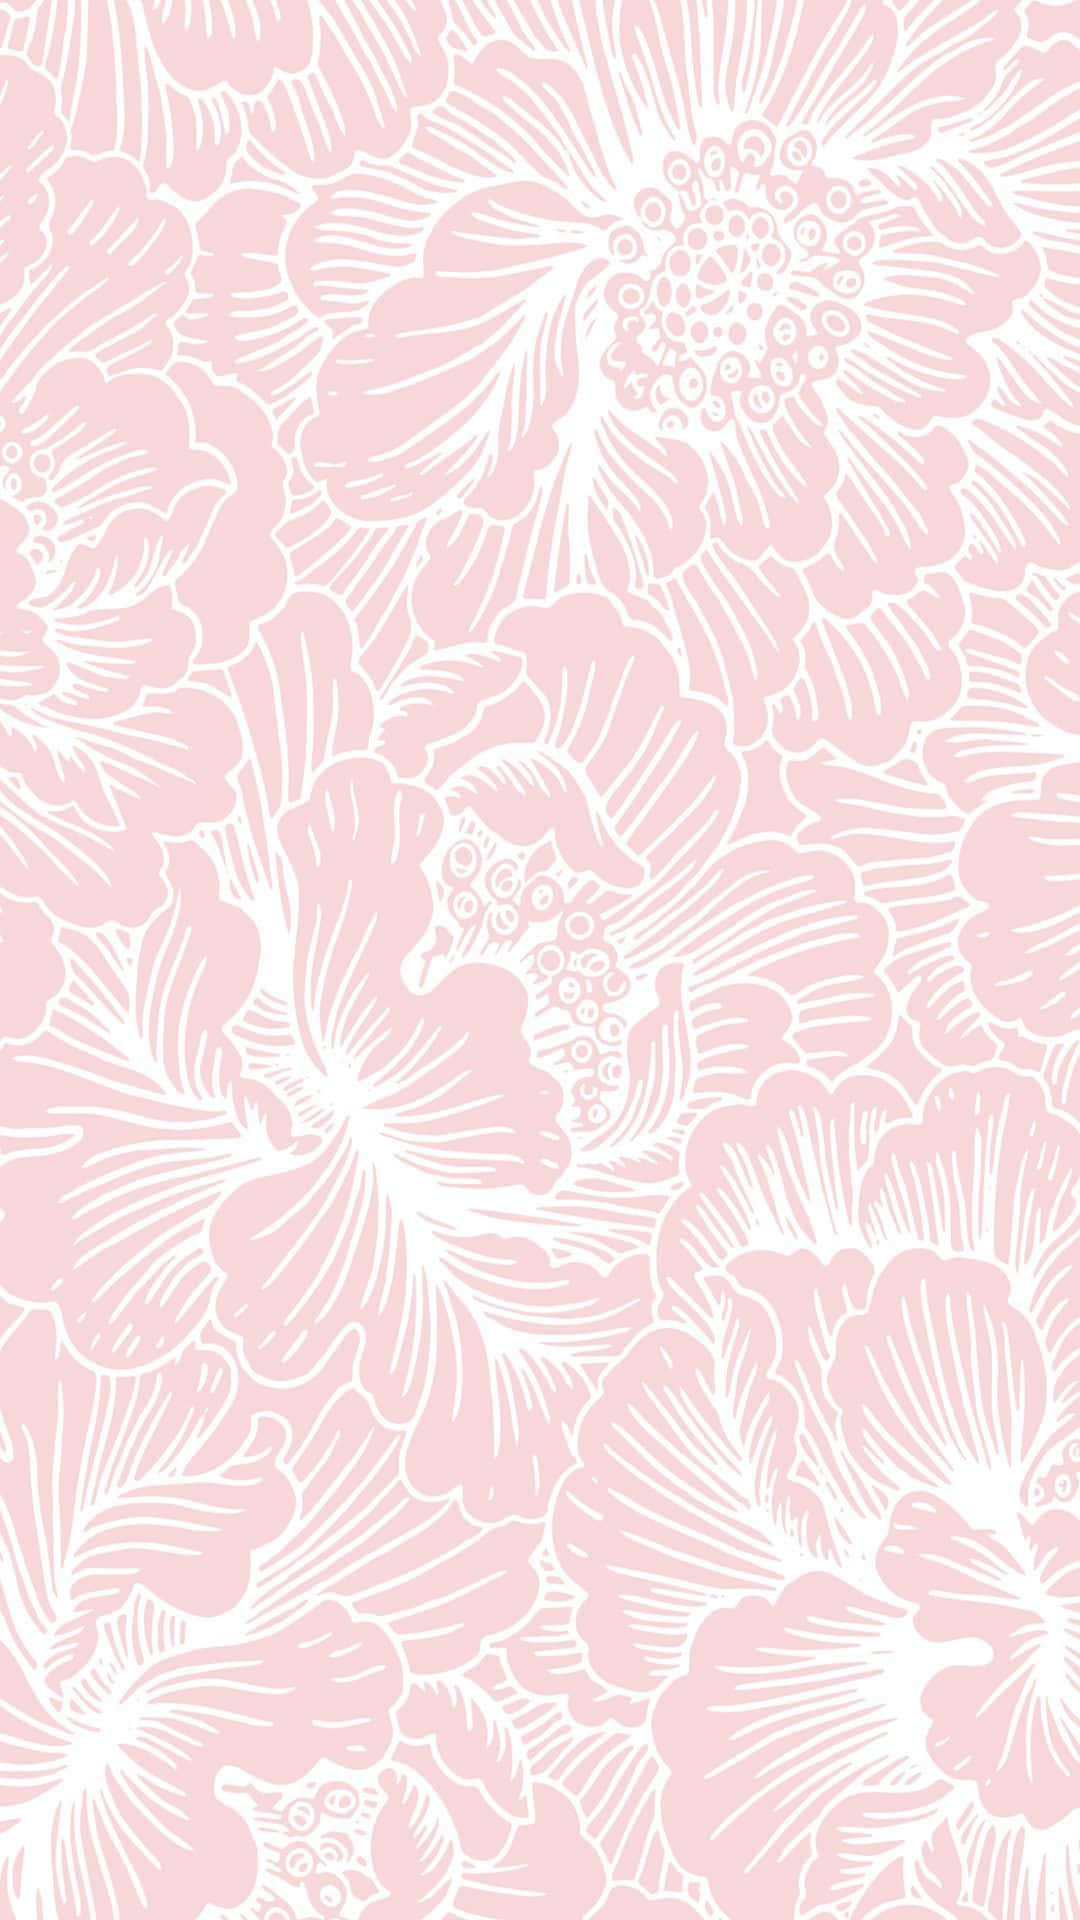 A beautiful soft pink background perfect for any spring day